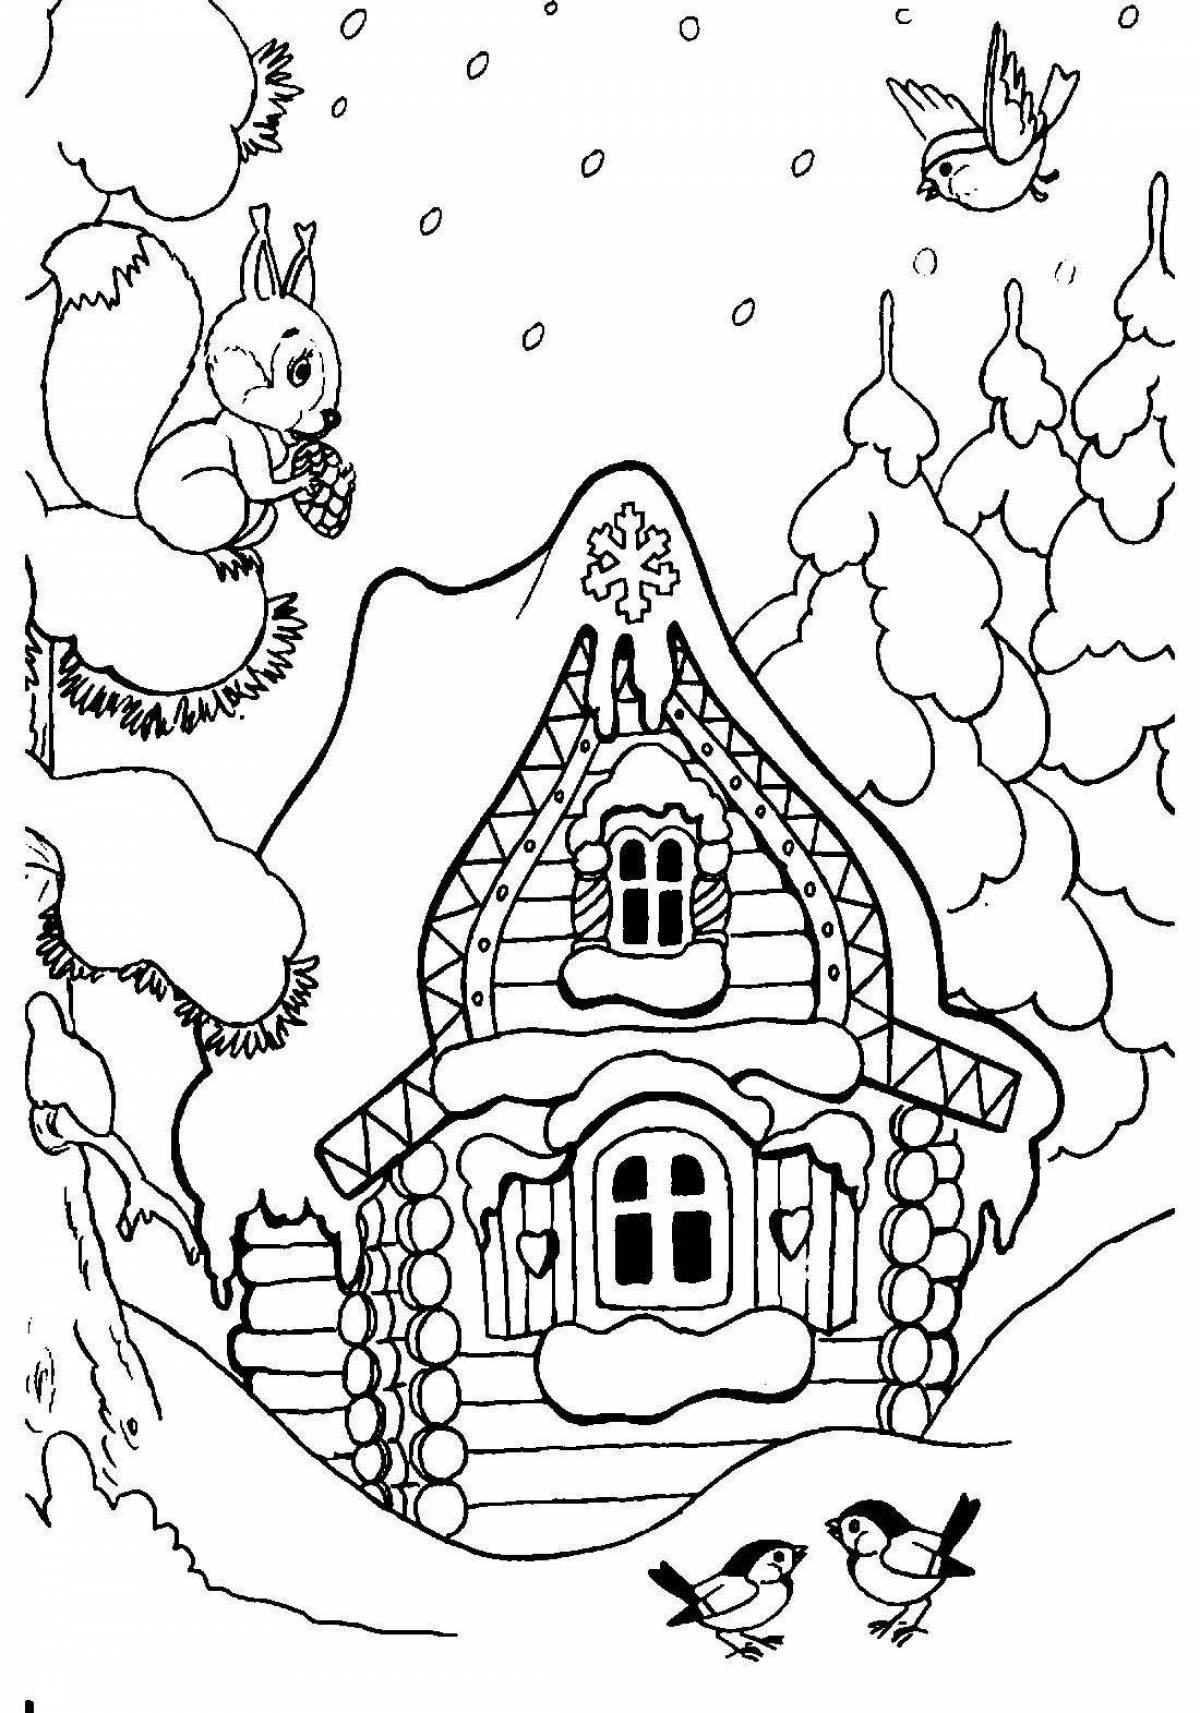 Exquisite winter house coloring book